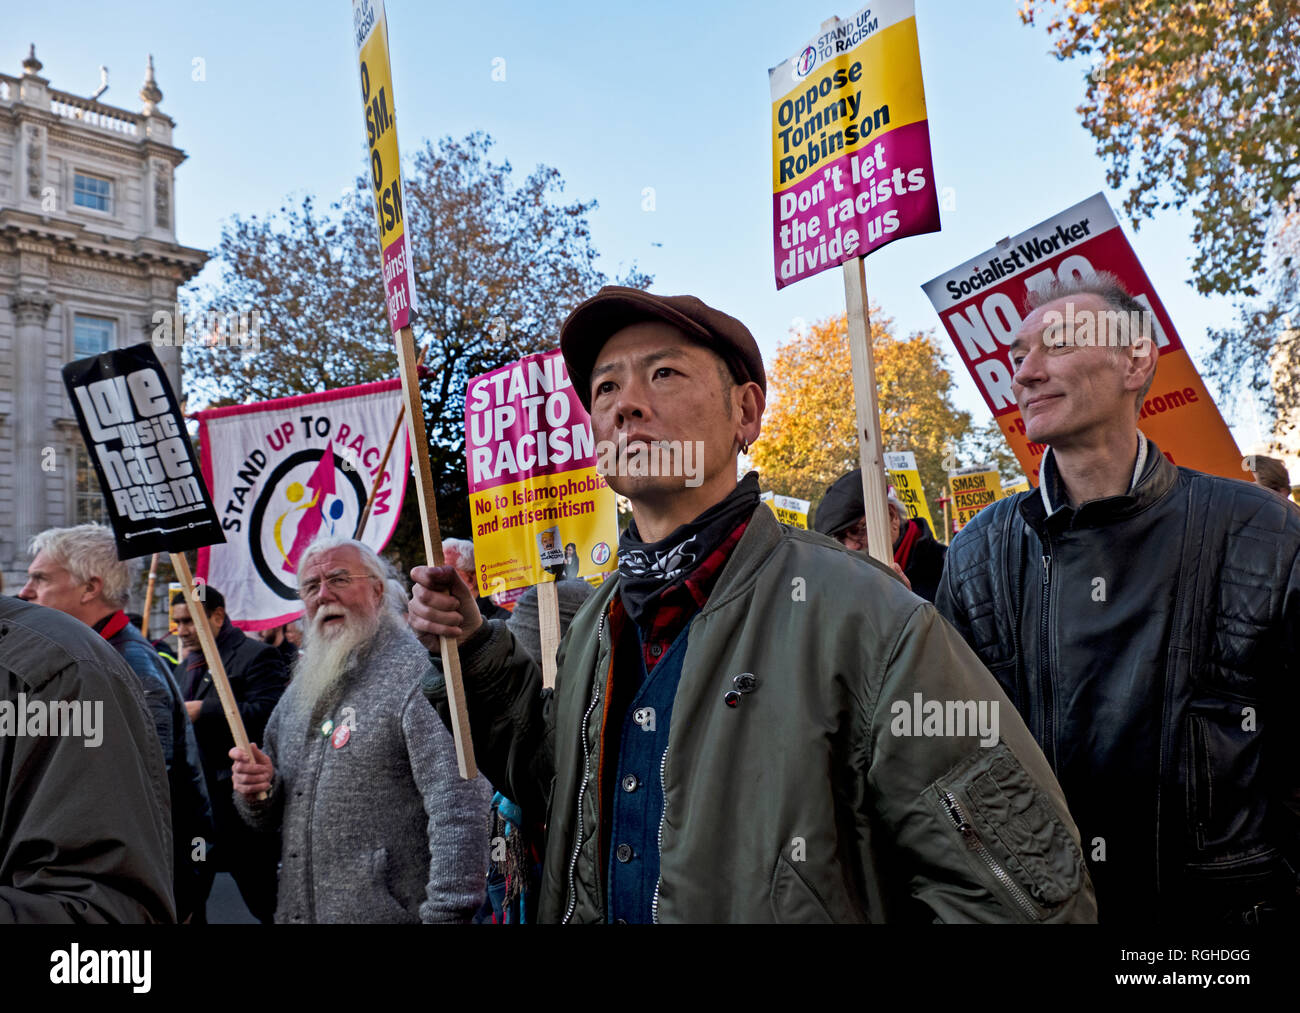 Protest opposing Tommy Robinson and racism. Anti-racism Anti-Fascism march and protest through central London on 17 Nov 2018 Stock Photo